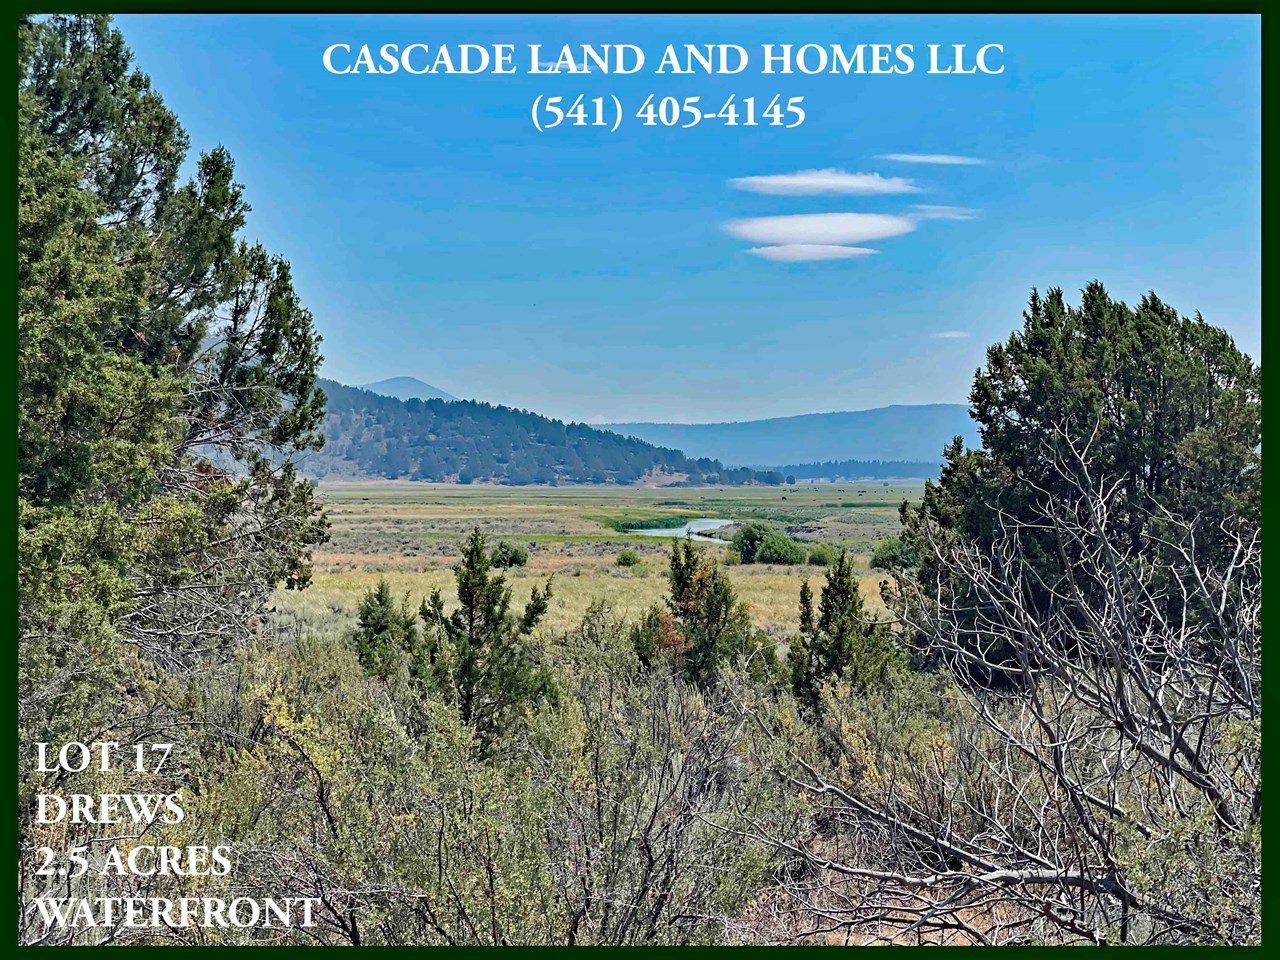 this photo was taken at the street looking across the picturesque sprague river valley. this could be the view from your new home!

